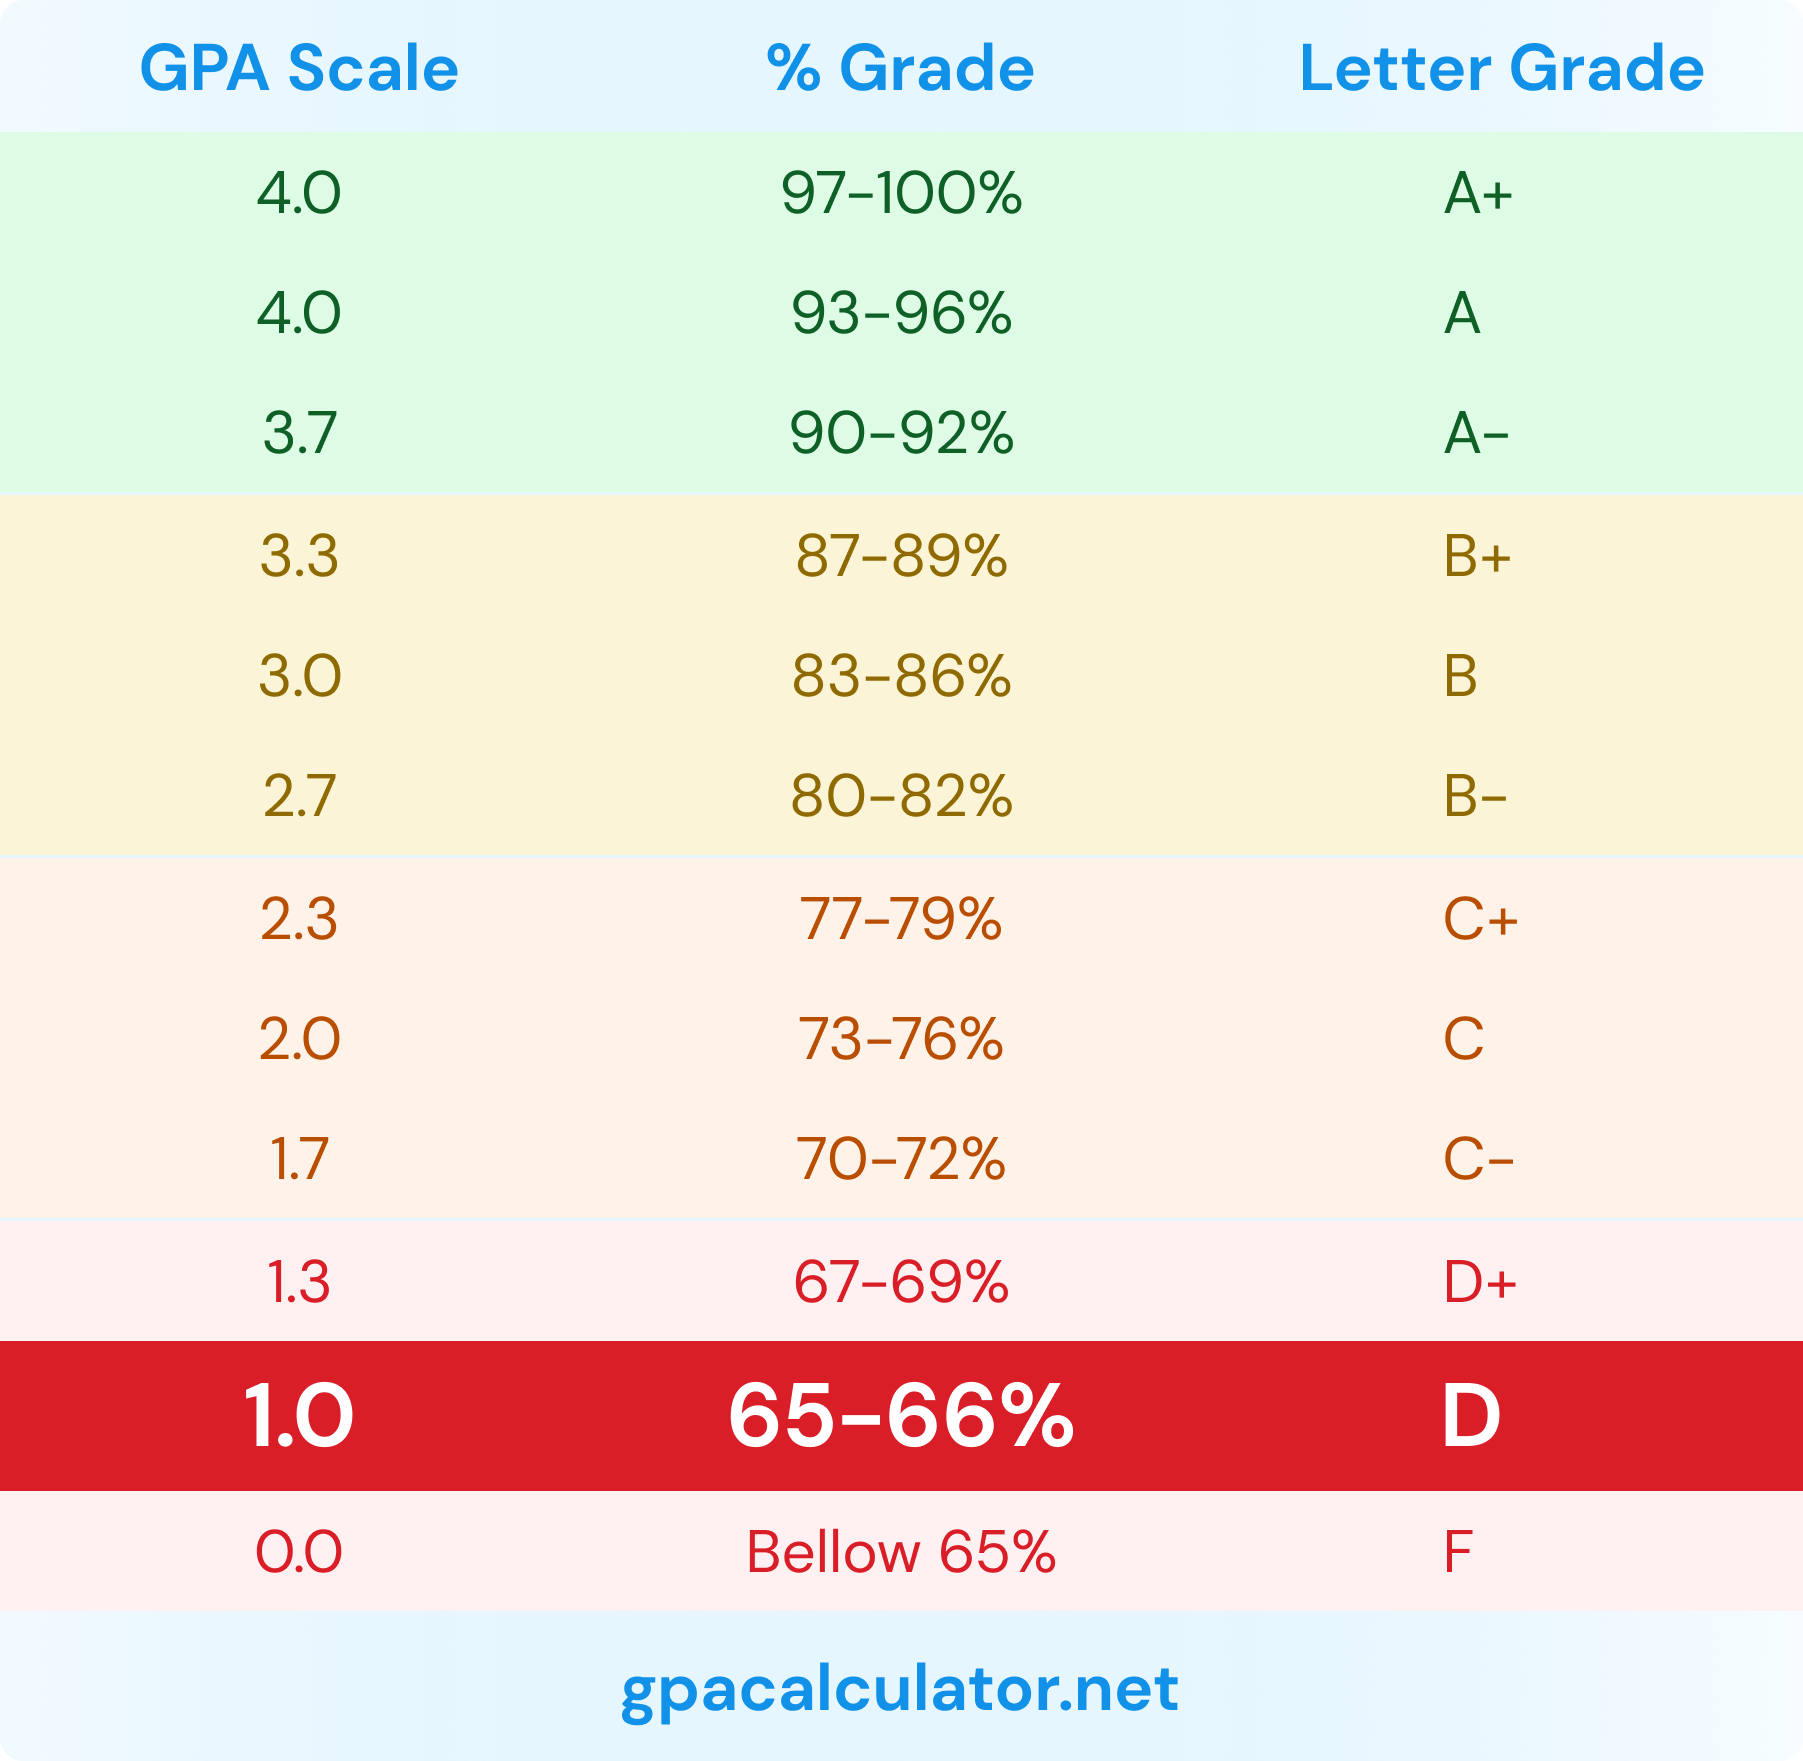 1.0 GPA is equivalent to 6566 or D grade.